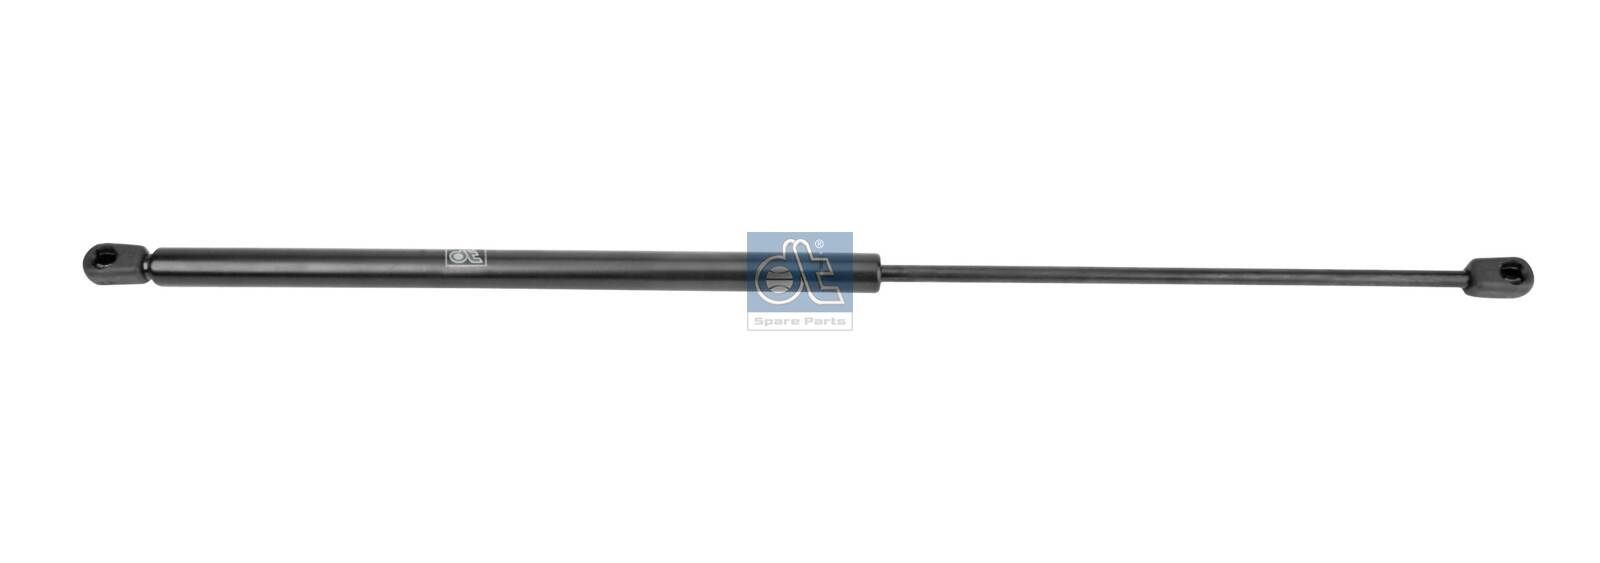 DT Spare Parts 230N, 616 mm Gas Spring 6.70052 buy